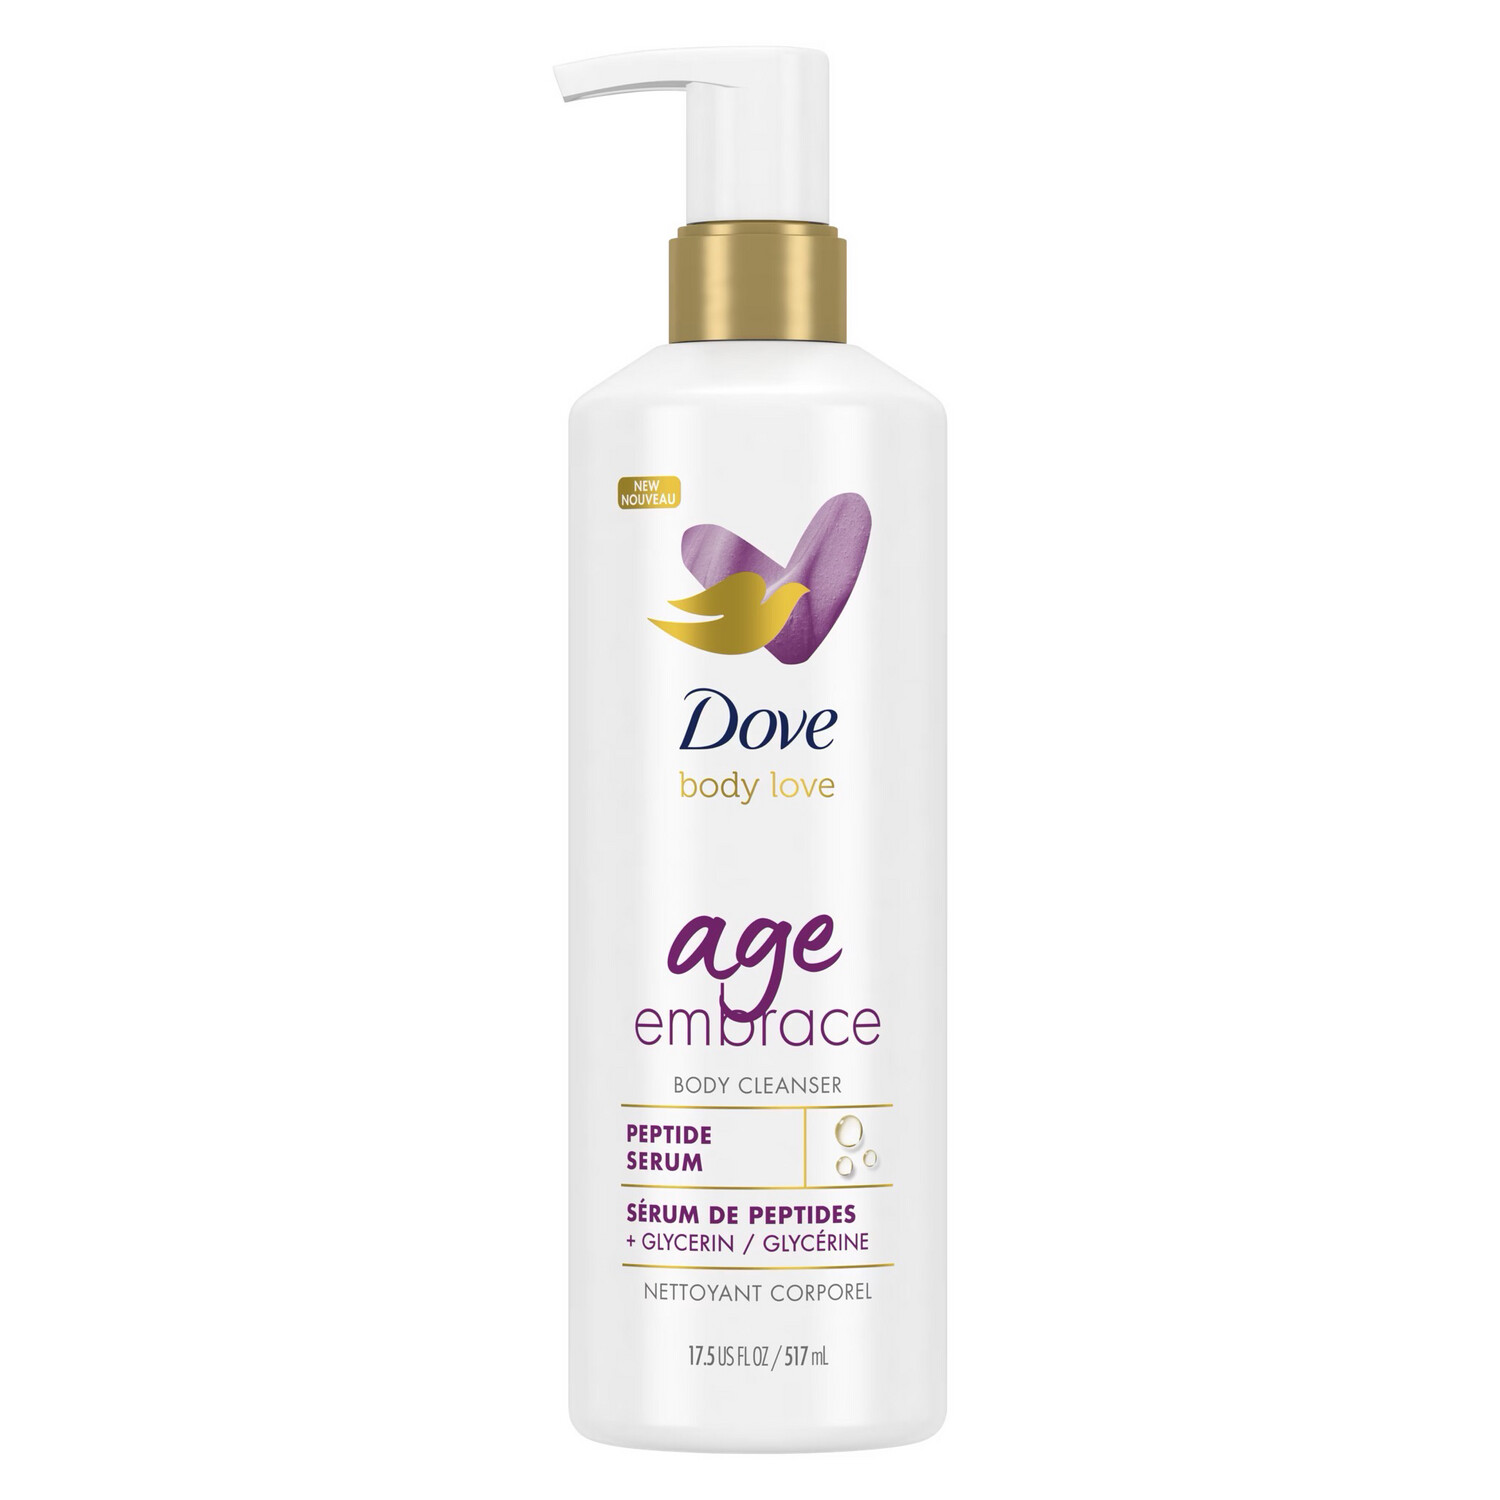 Body Cleanser Dove Age Embrace